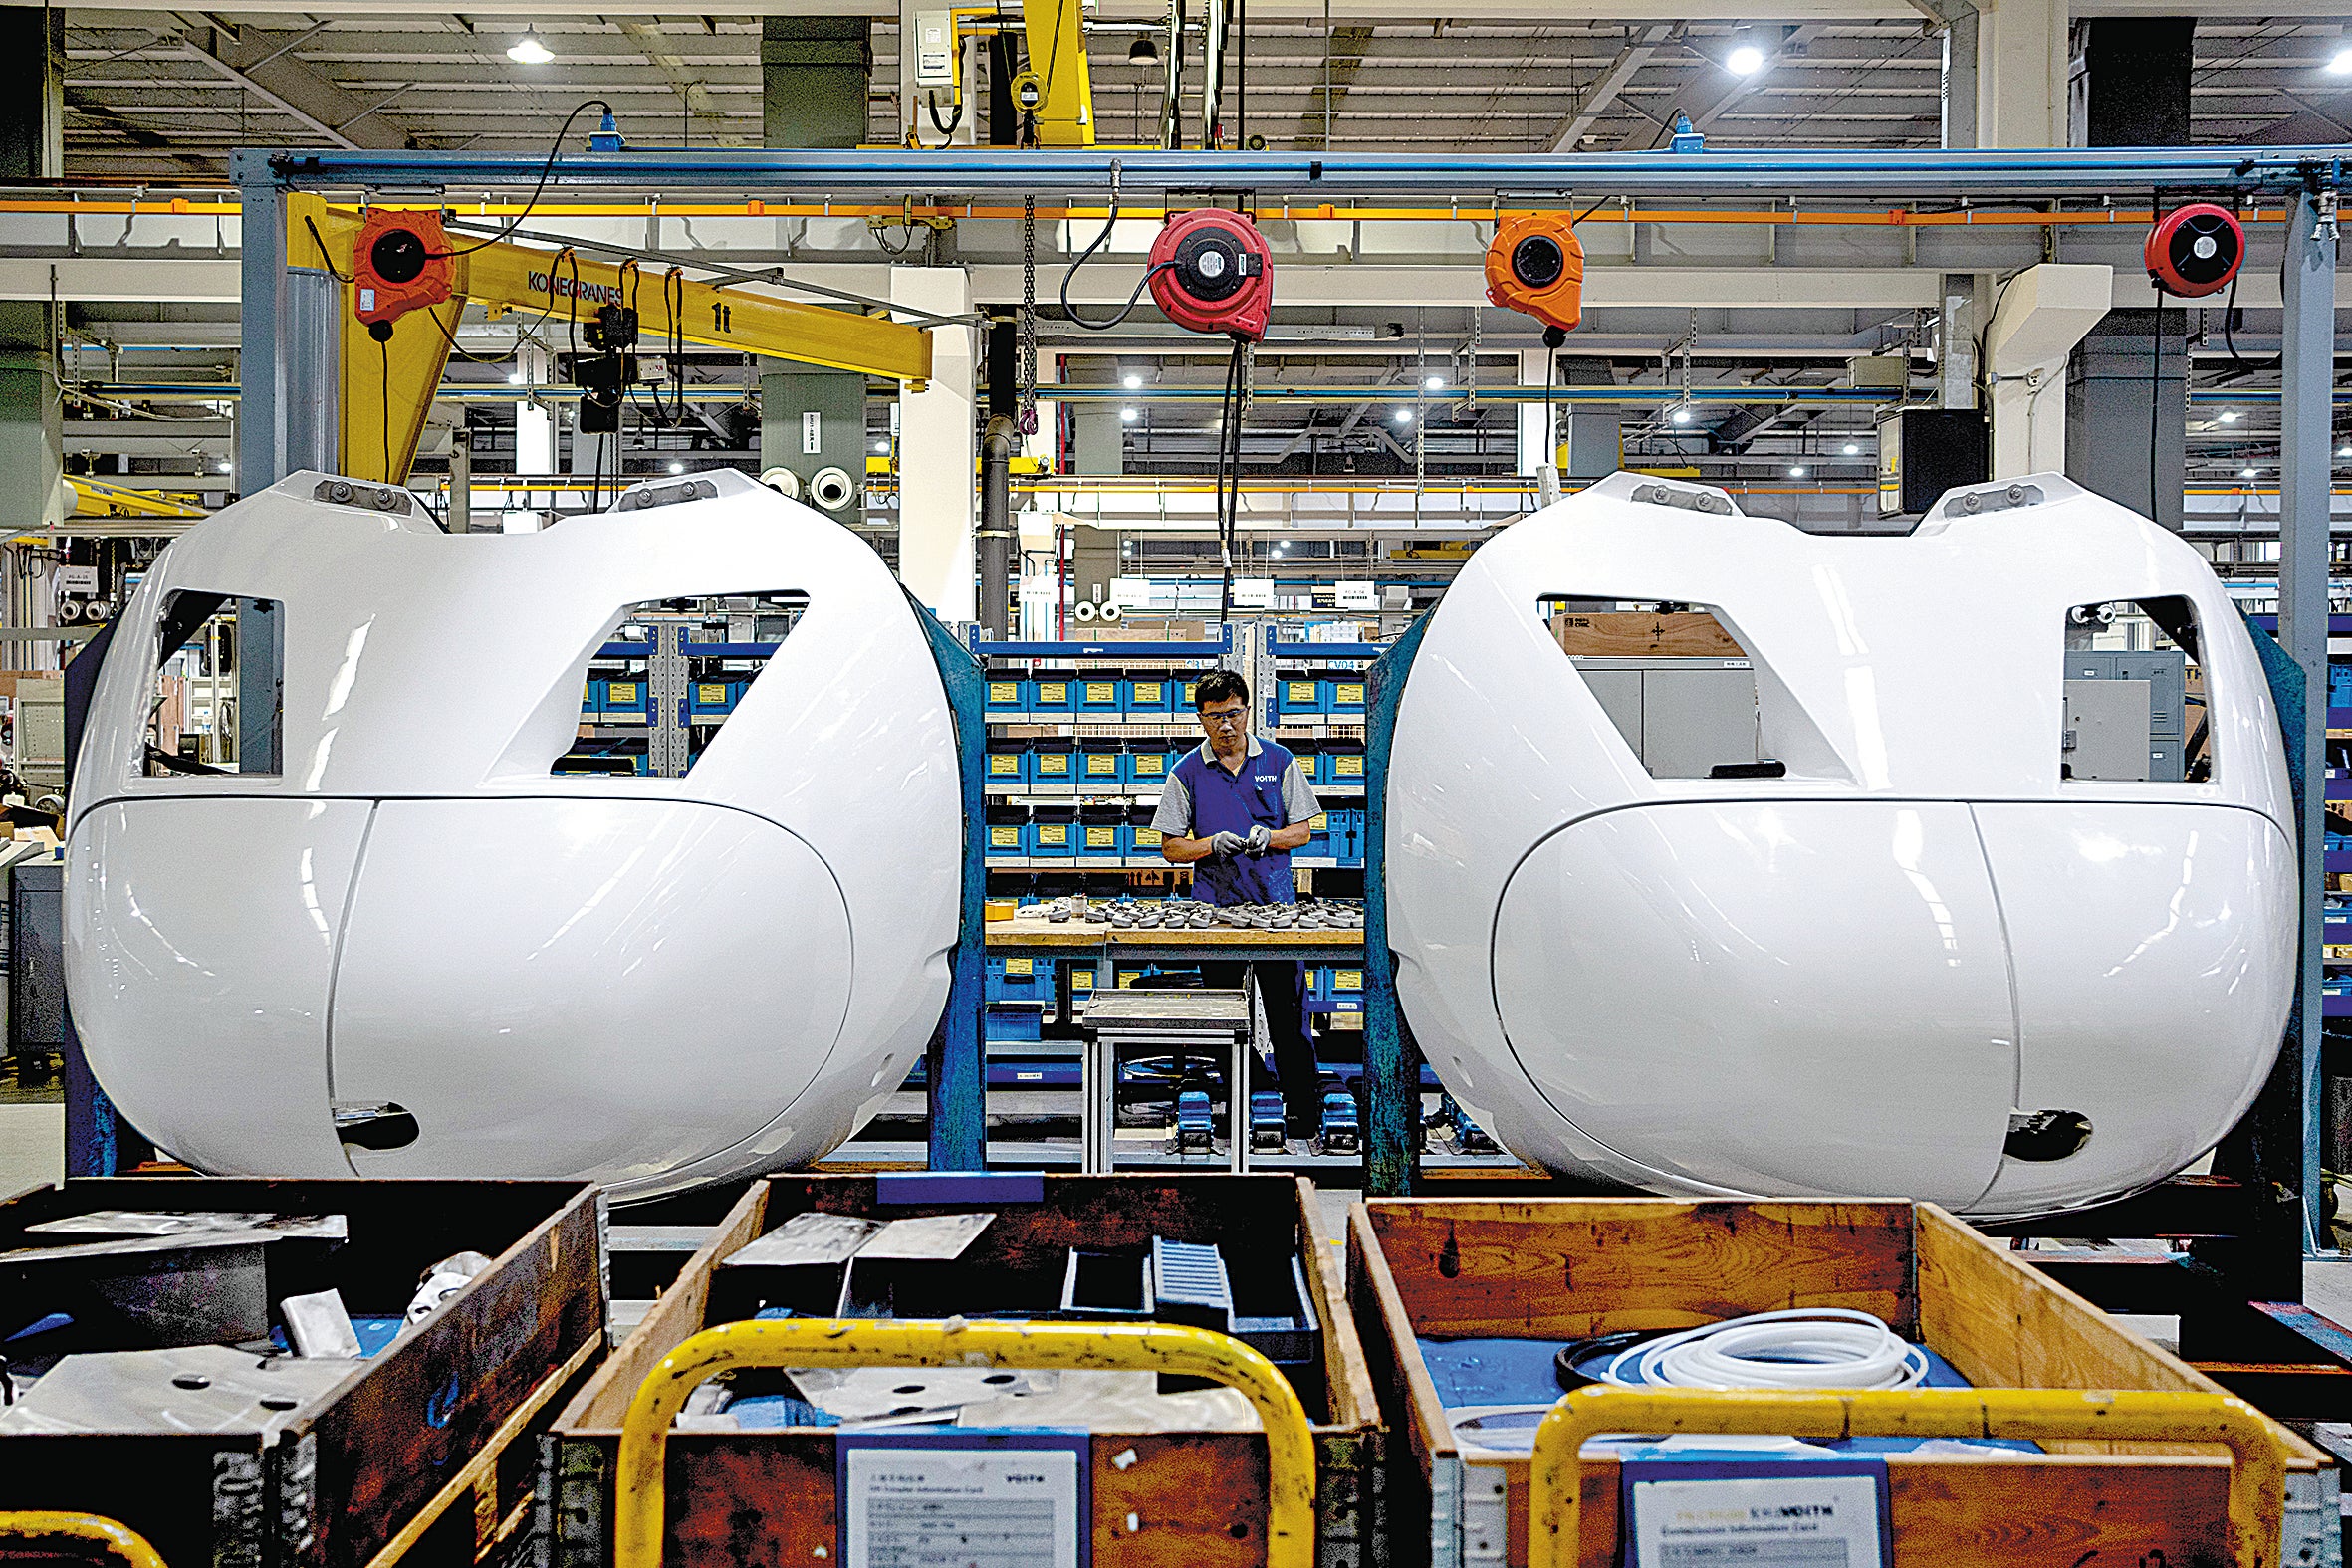 A Voith Turbo employee works on the Shanghai assembly line on July 21, 2022